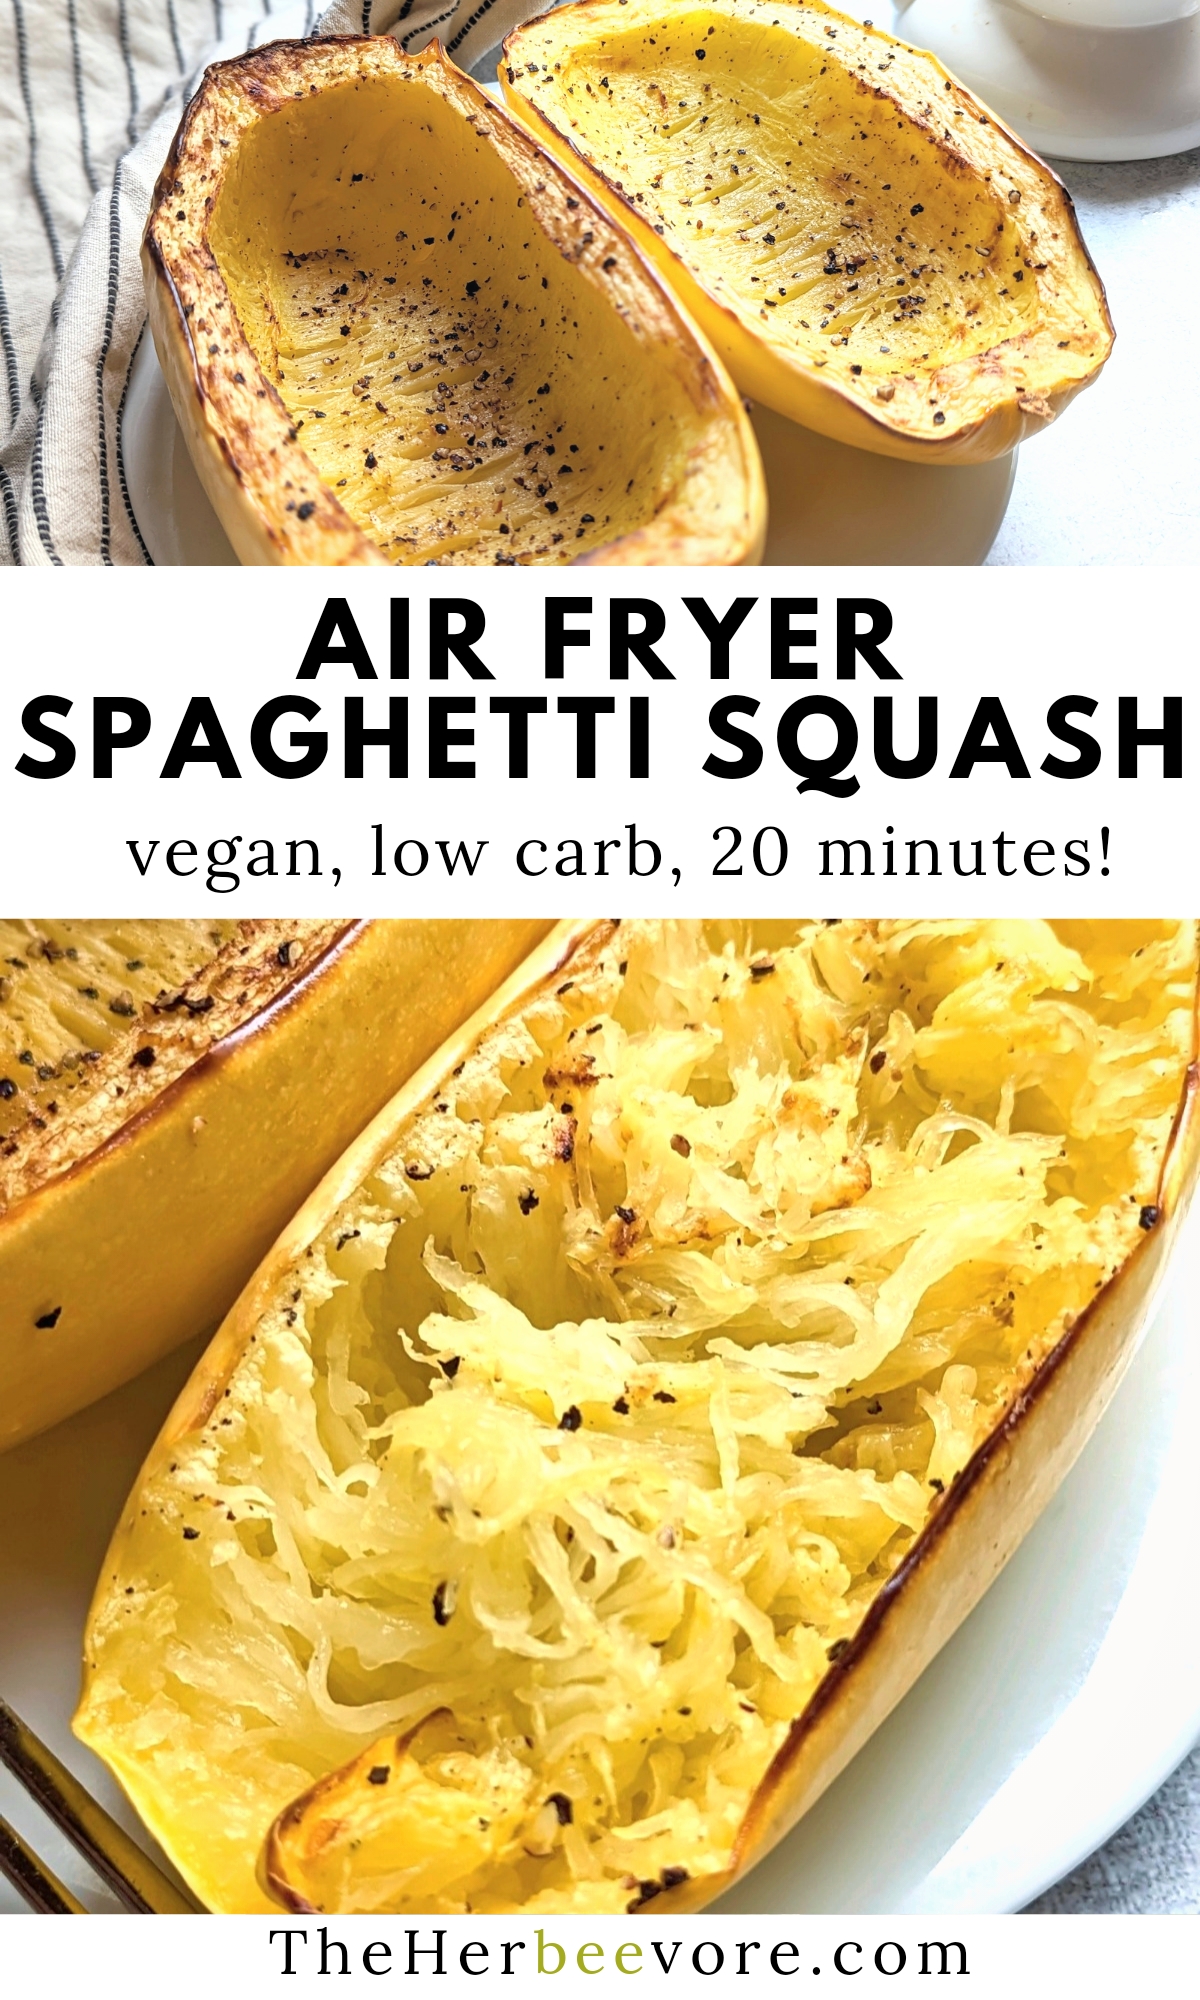 air fryer spaghetti squash recipe vegan low carbohydrate air fryer recipes in 20 minutes side dishes with squash